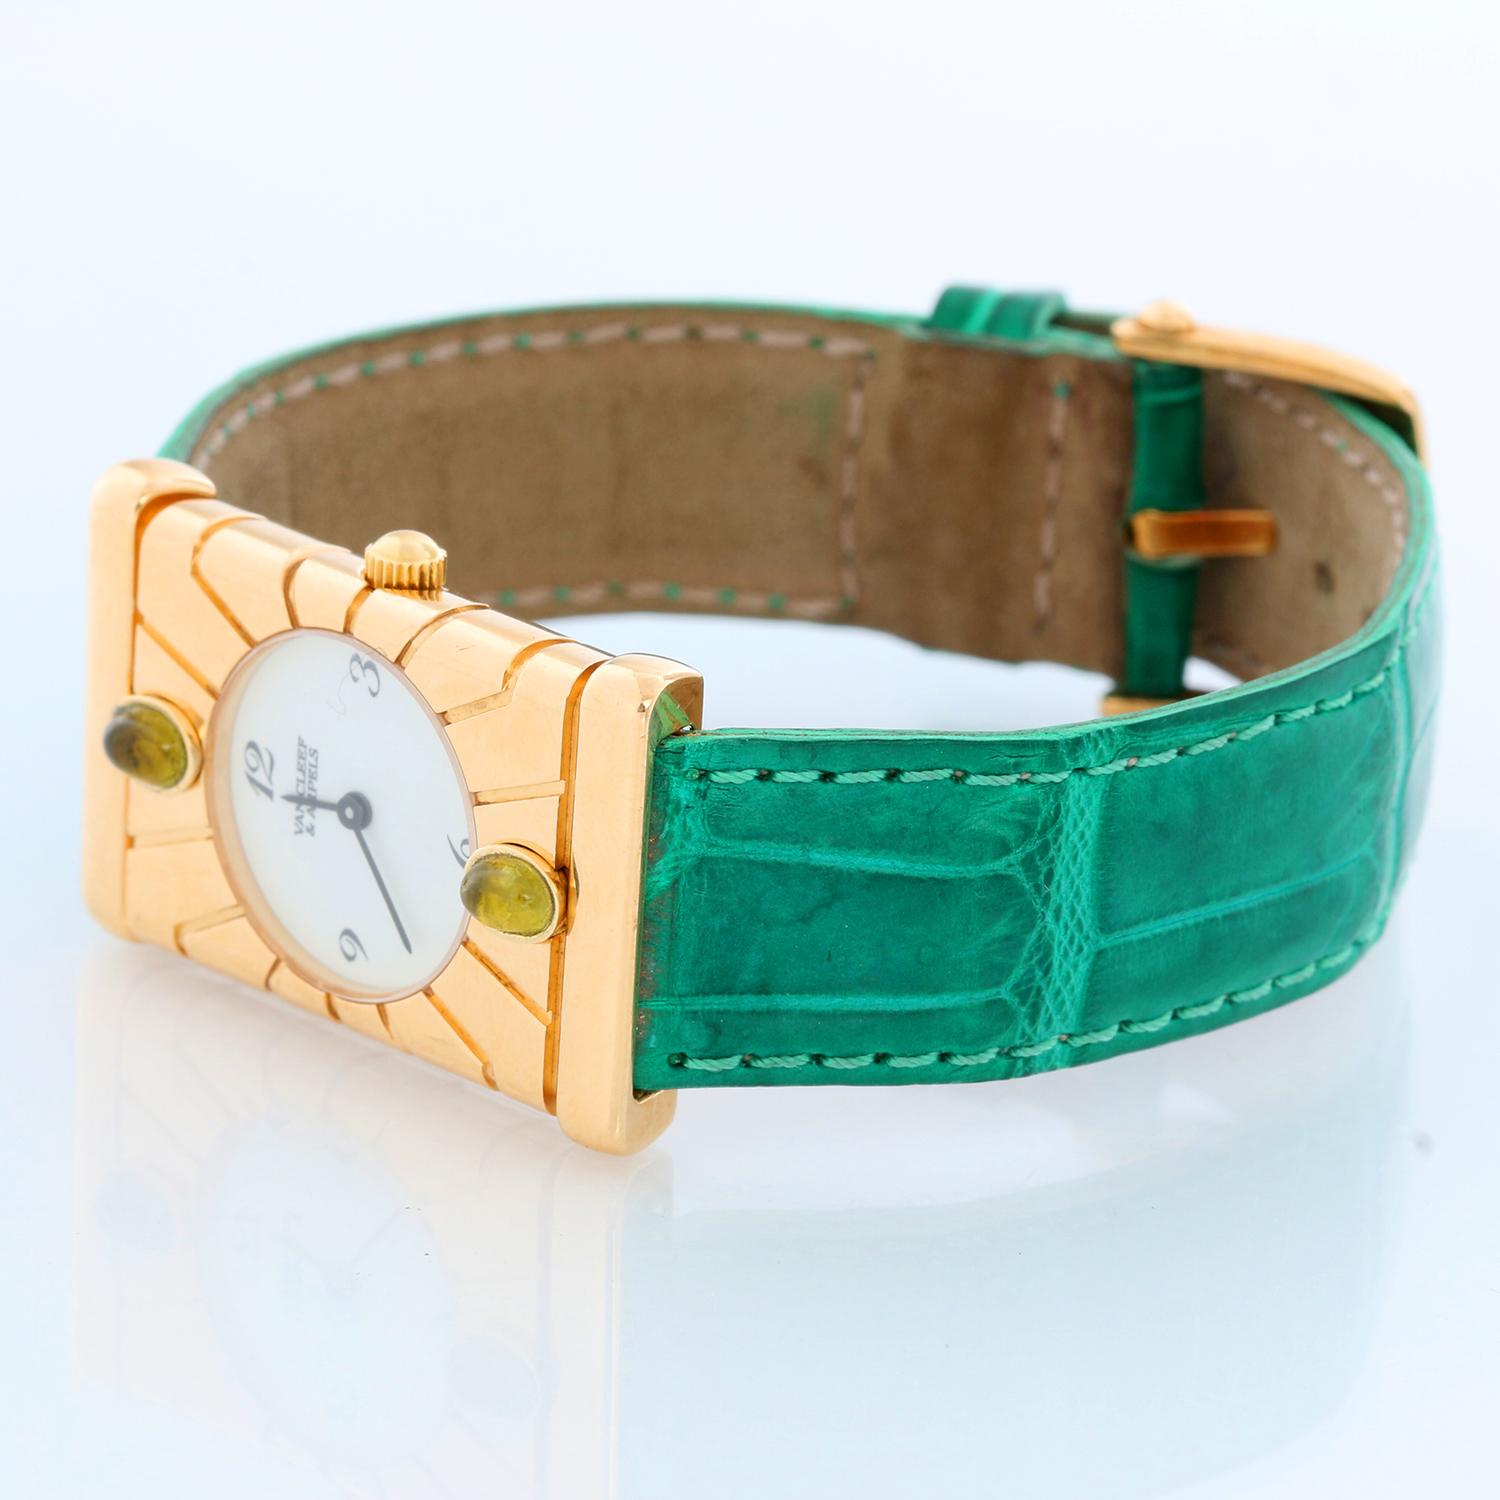 Van Cleef & Arpels Façade 18K Yellow Gold Vintage Watch - Quartz. 18K Yellow Gold  (22 mm x 33 mm) with green tourmaline on bezel. White dial with  Arabic numerals. Green strap with Van Cleef & Arpels tang buckle . Pre-owned with custom box .